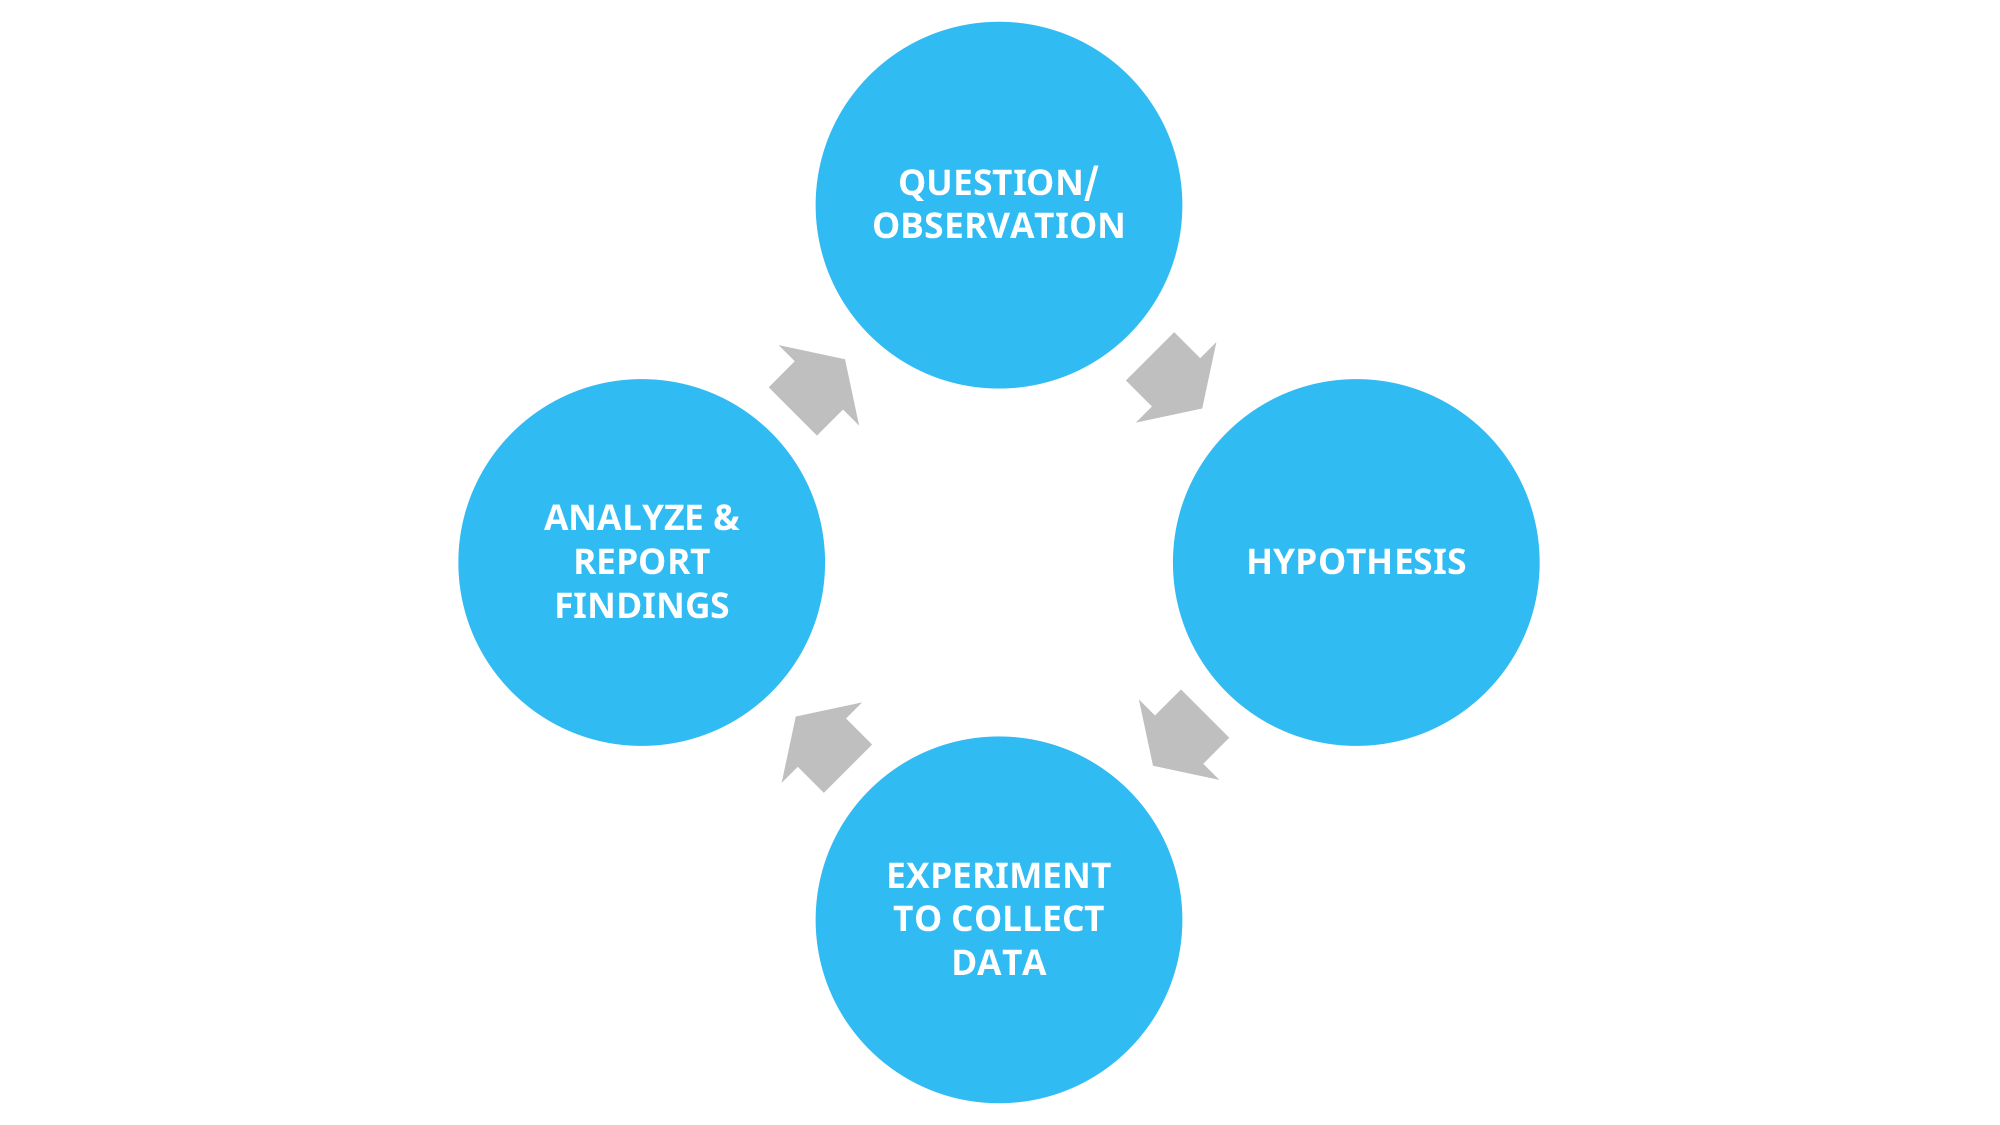 The key steps of the scientific method